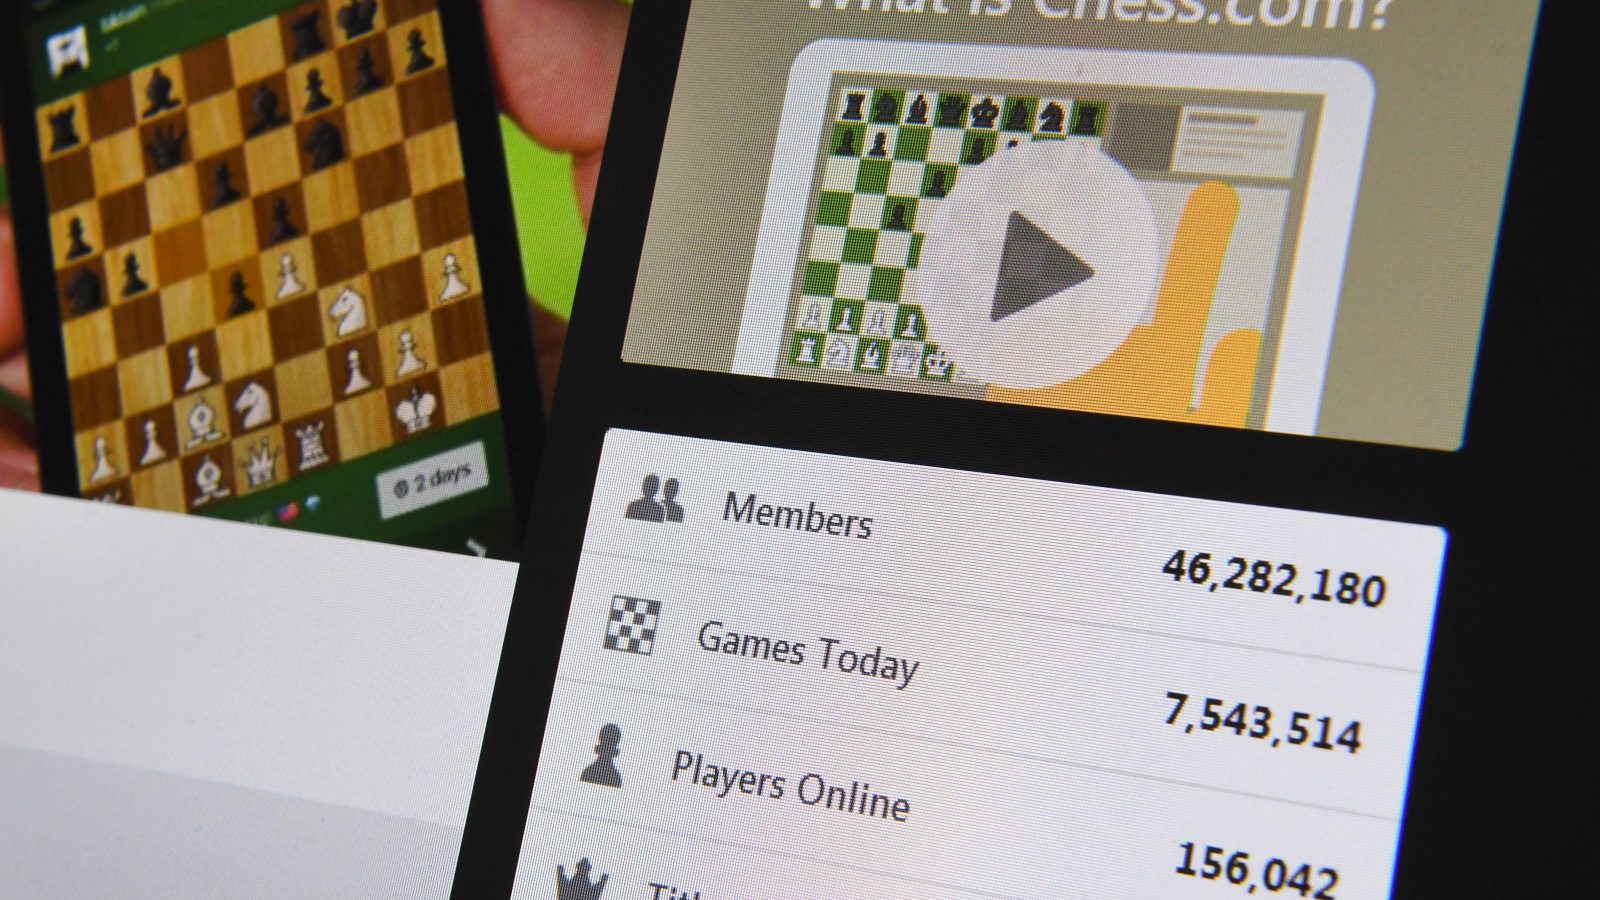 What happened to the Openings section at the mobile app? - Chess